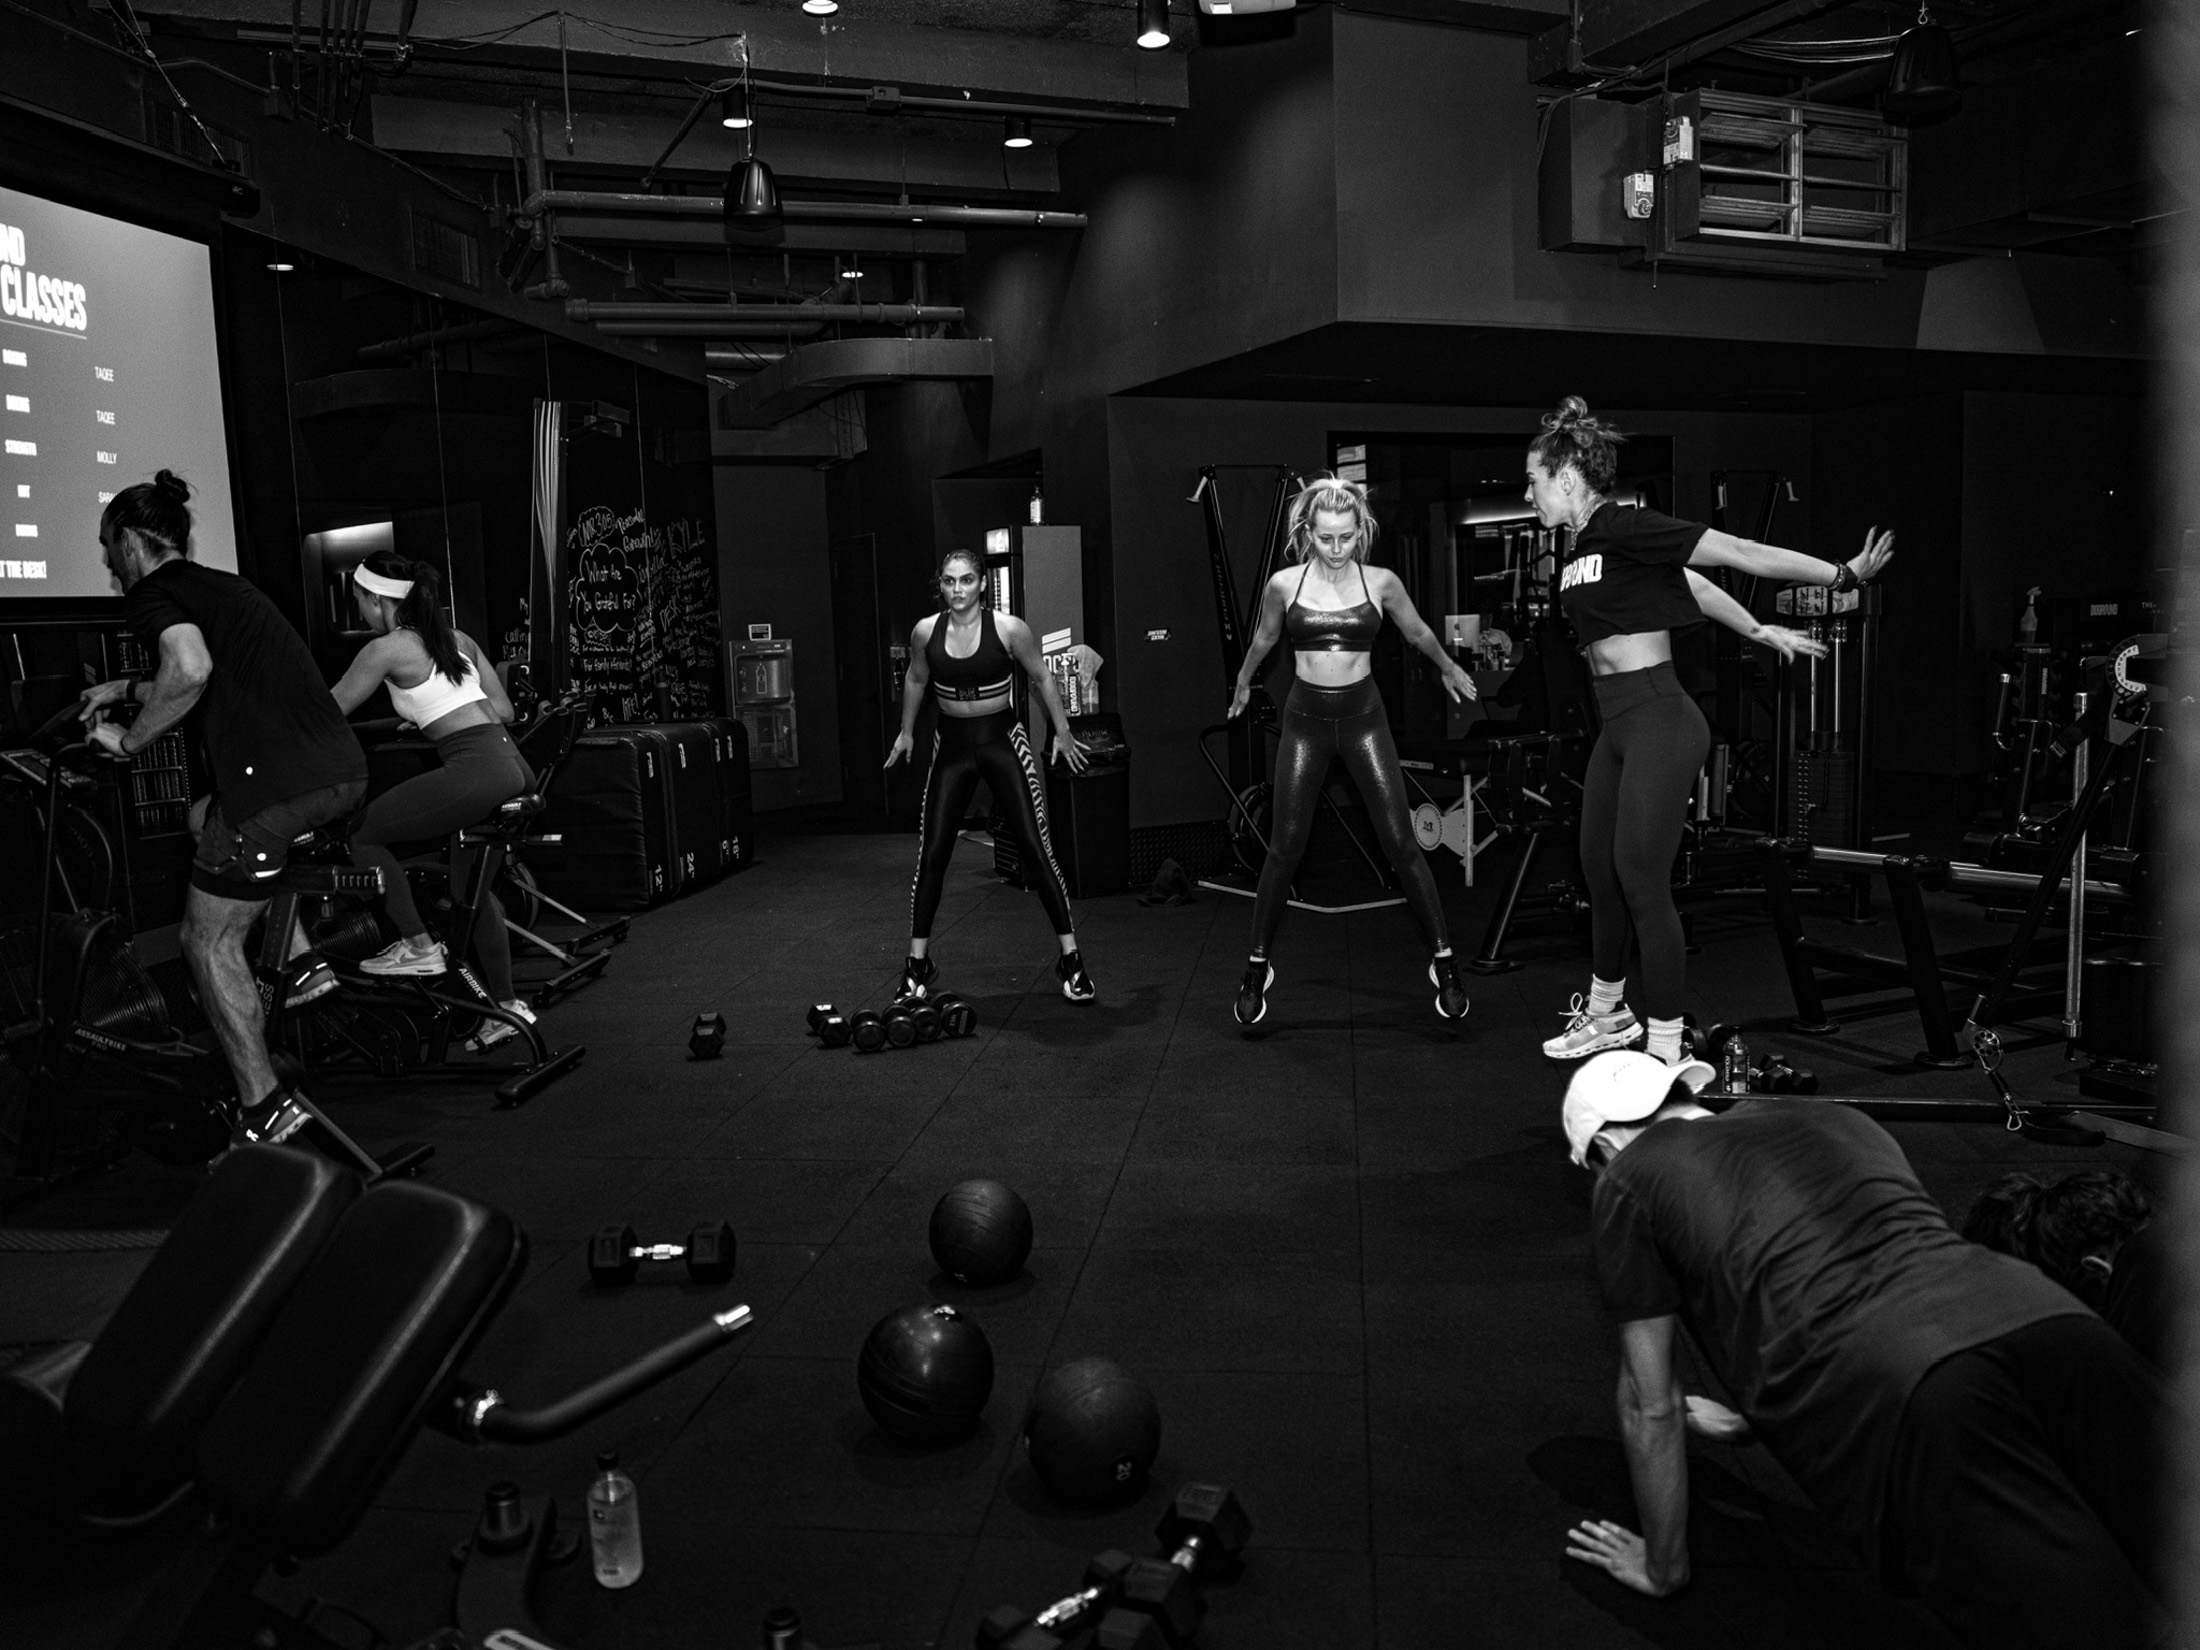 Science-Based Interval Training Classes About to Hit NYC Hard